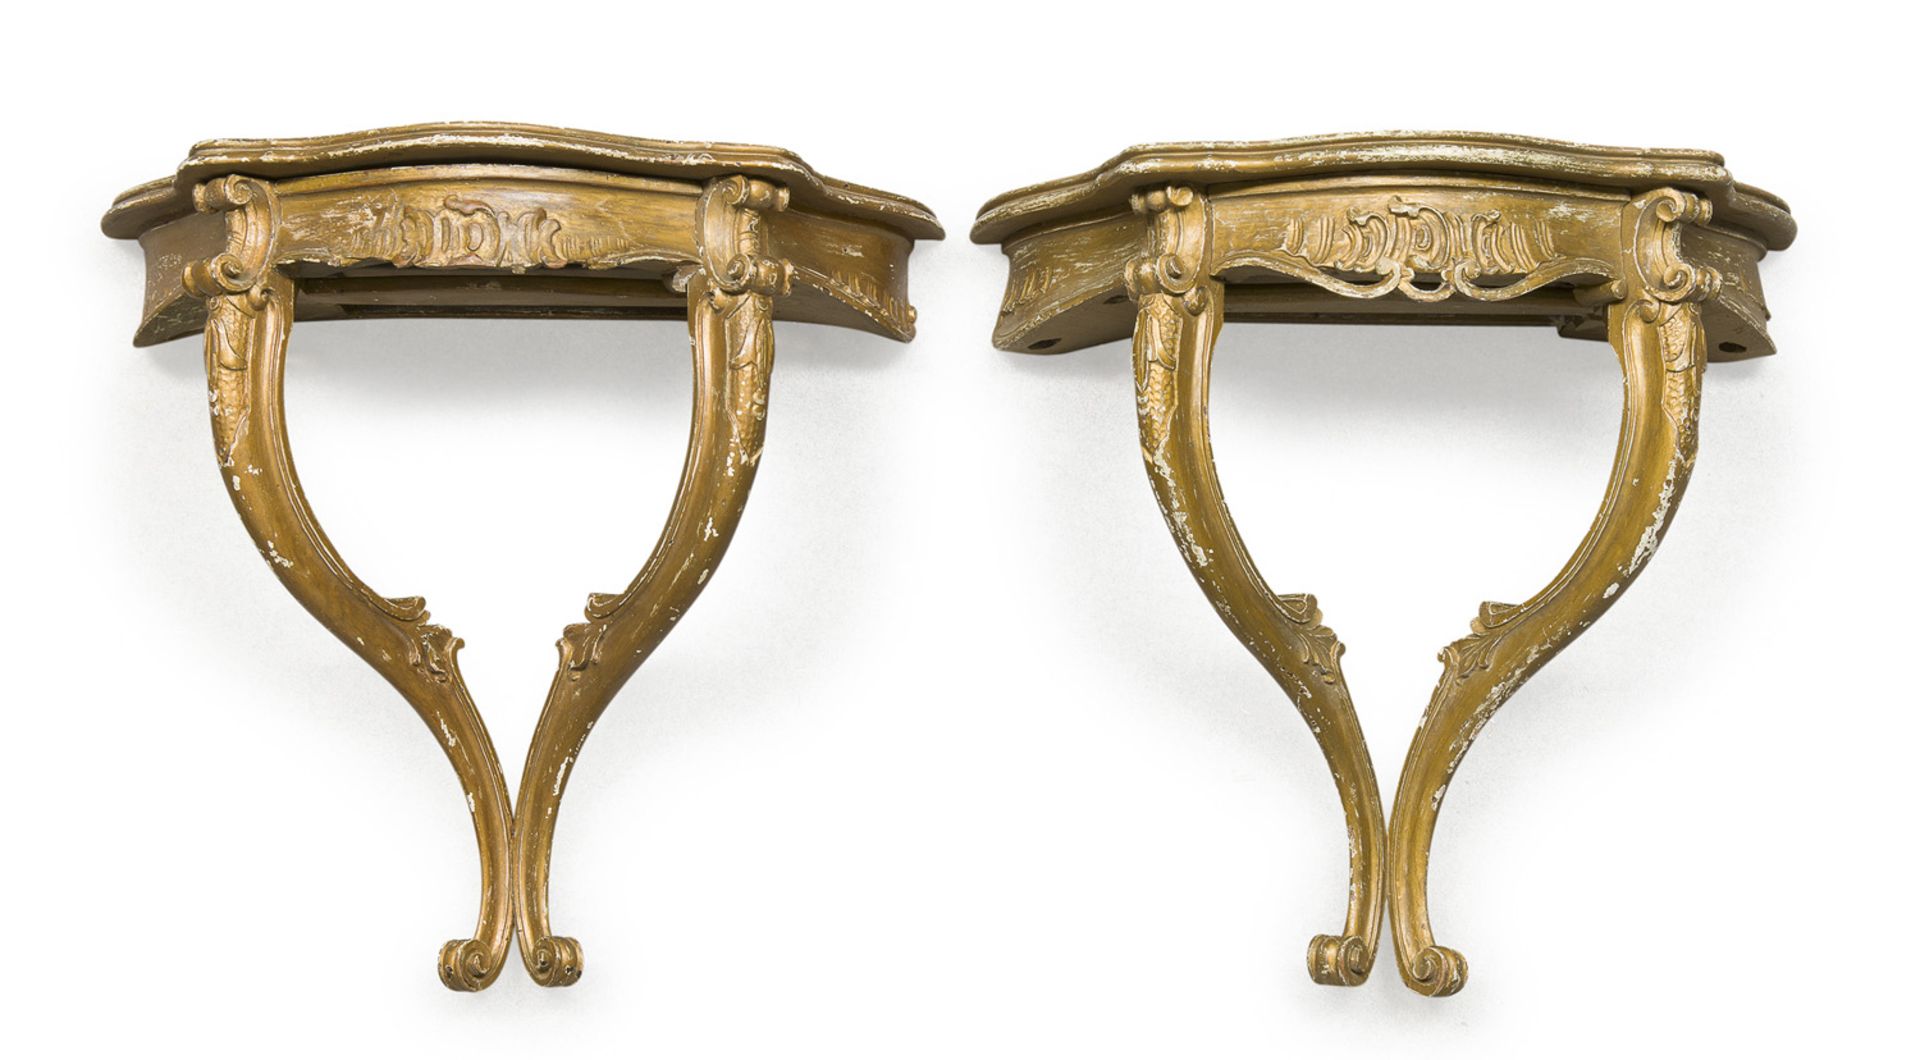 PAIR OF SMALL HANGING CONSOLES LATE 19TH CENTURY